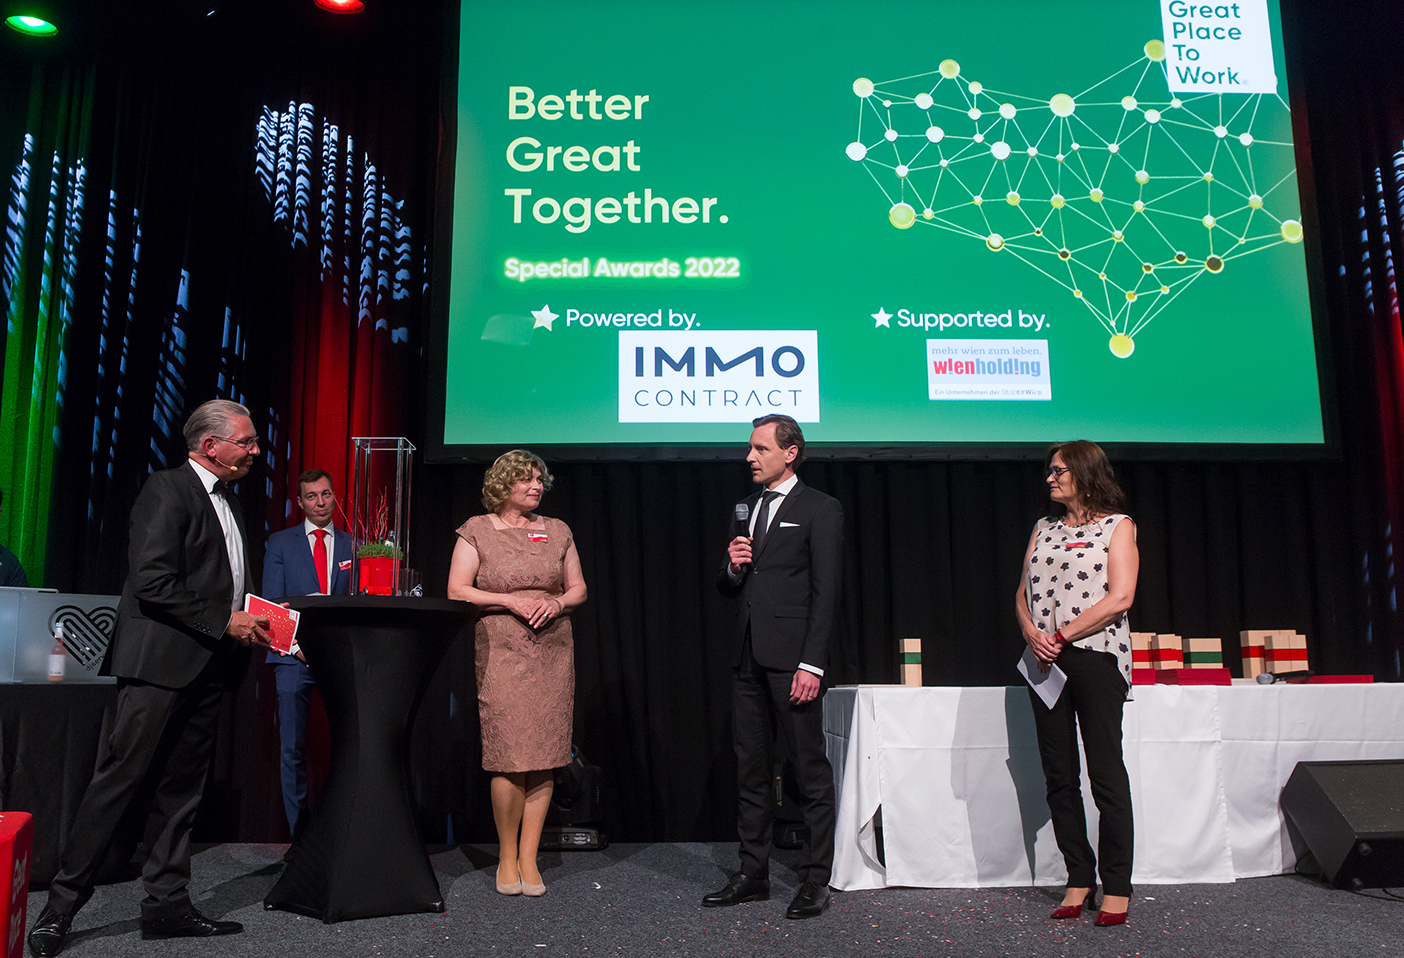 Better Great Together: IMMOcontract als Hauptsponsor bei der Great Place to Work Gala 2022